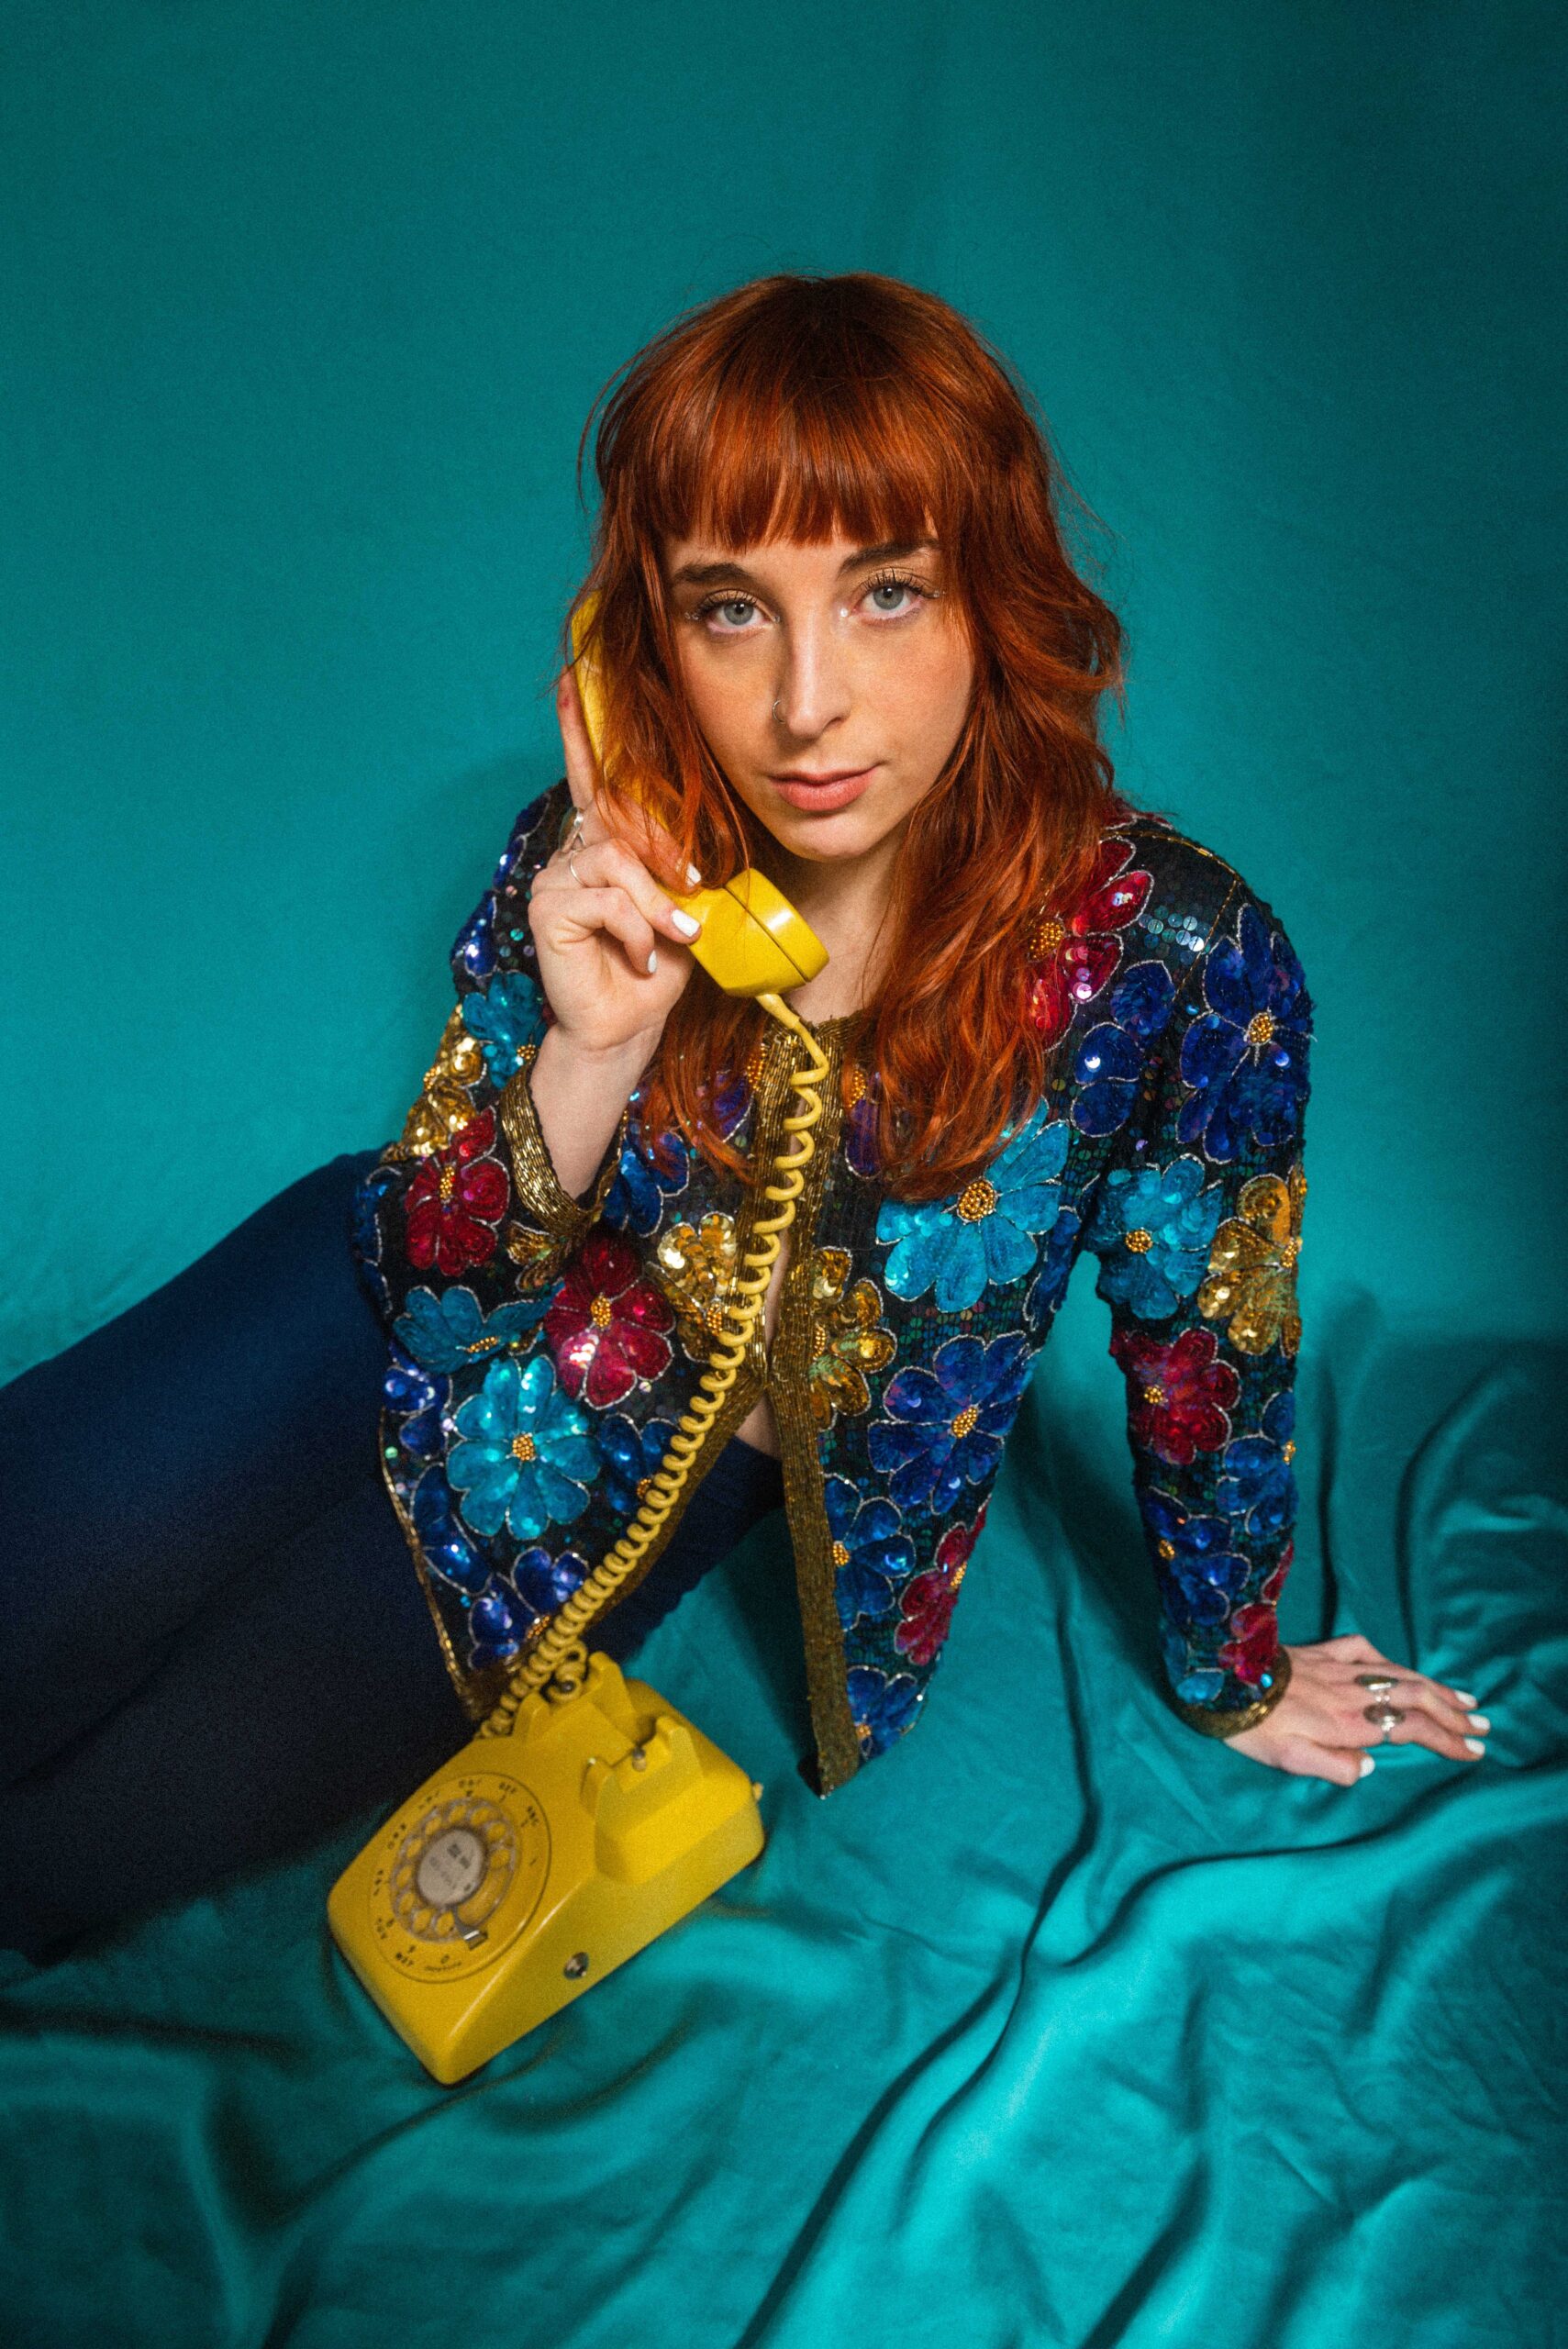 Photo of Kendall Lujan, on a rotary phone, looking into the camera.